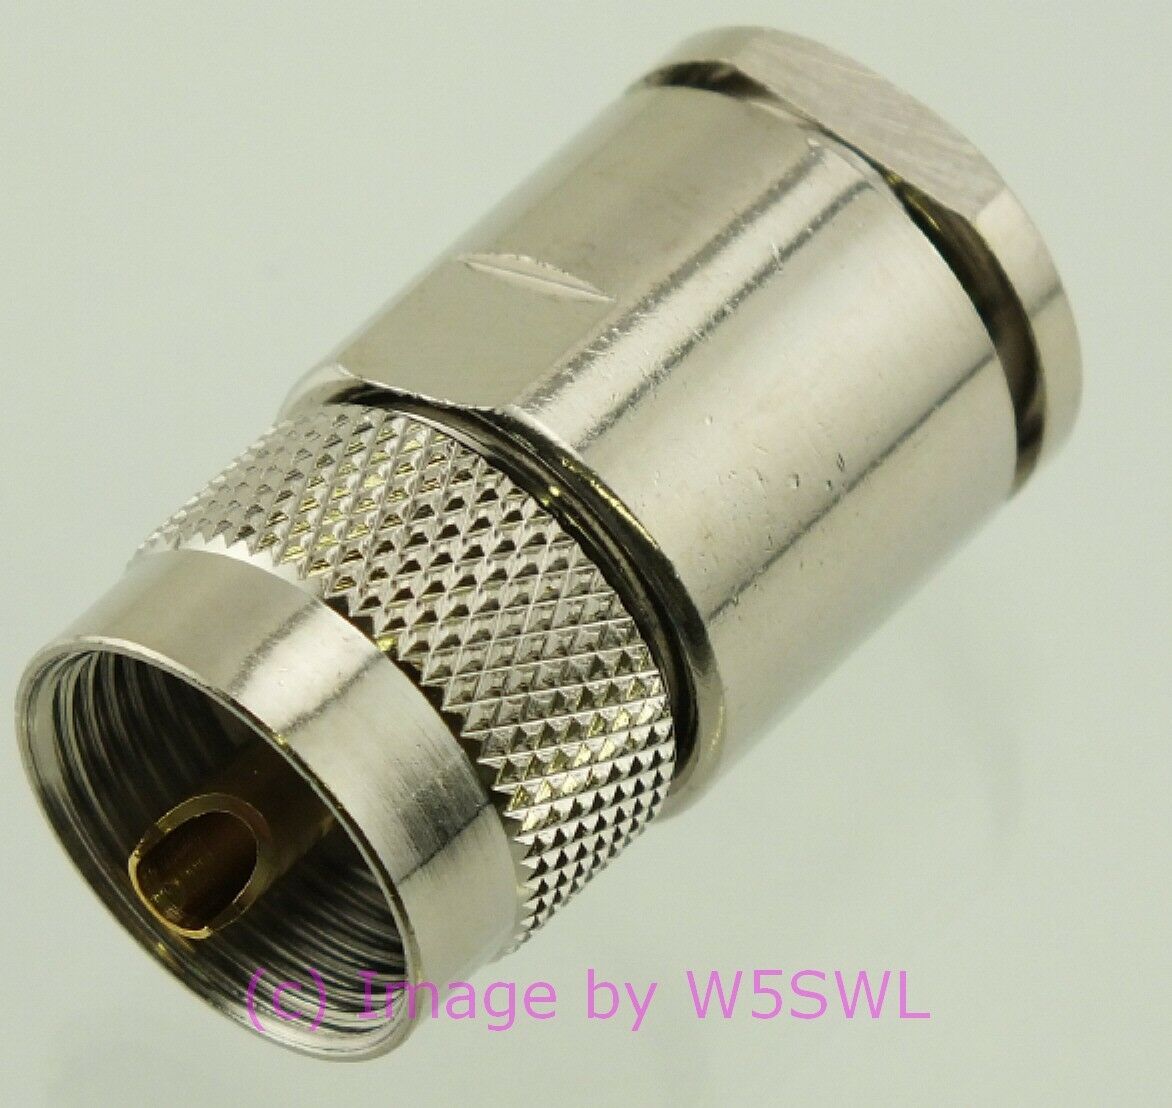 W5SWL UHF Male Coax Connector LMR-400 Clamp - Dave's Hobby Shop by W5SWL